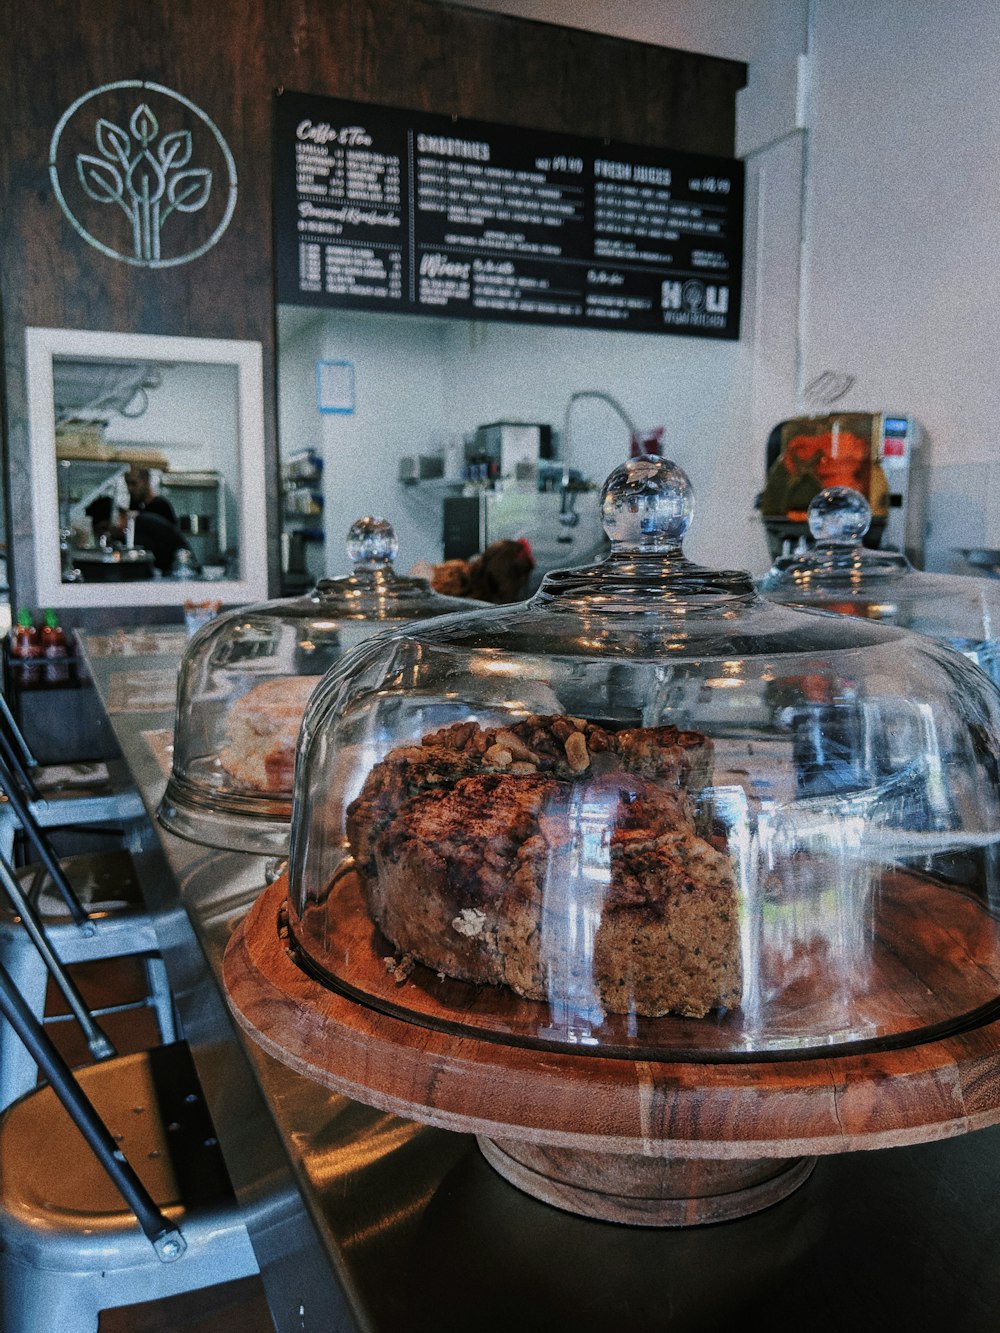 coffee shop sells two cakes inside dome glasses